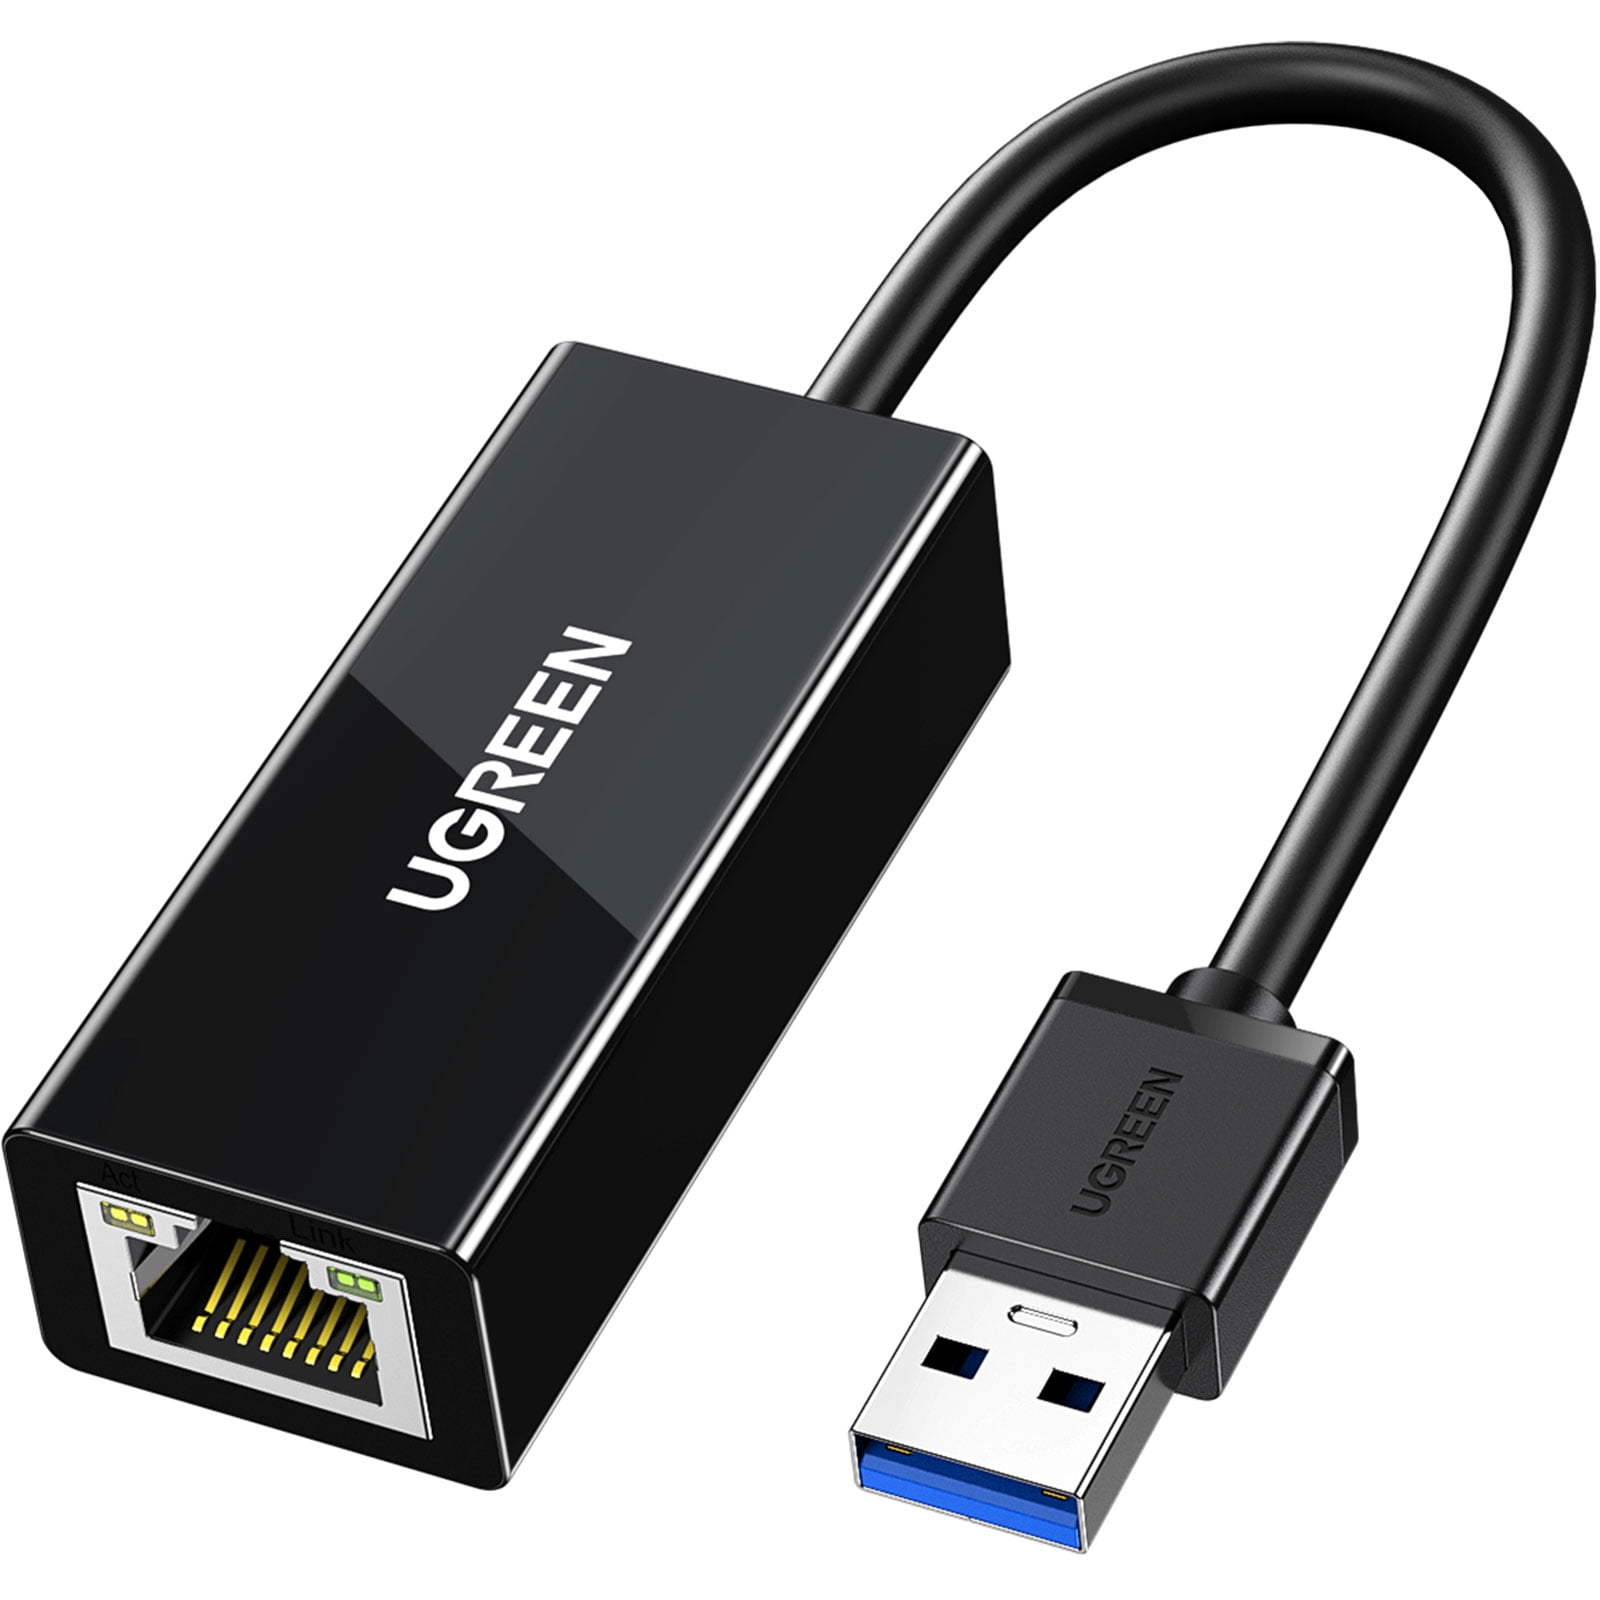 UGREEN USB to Ethernet Adapter, USB 3.0 to 10 100 1000 Mbps Network USB to RJ45 LAN Ethernet Adapter for Laptop PC Nintendo Switch MacBook Surface Windows macOS Linux - Walmart.com